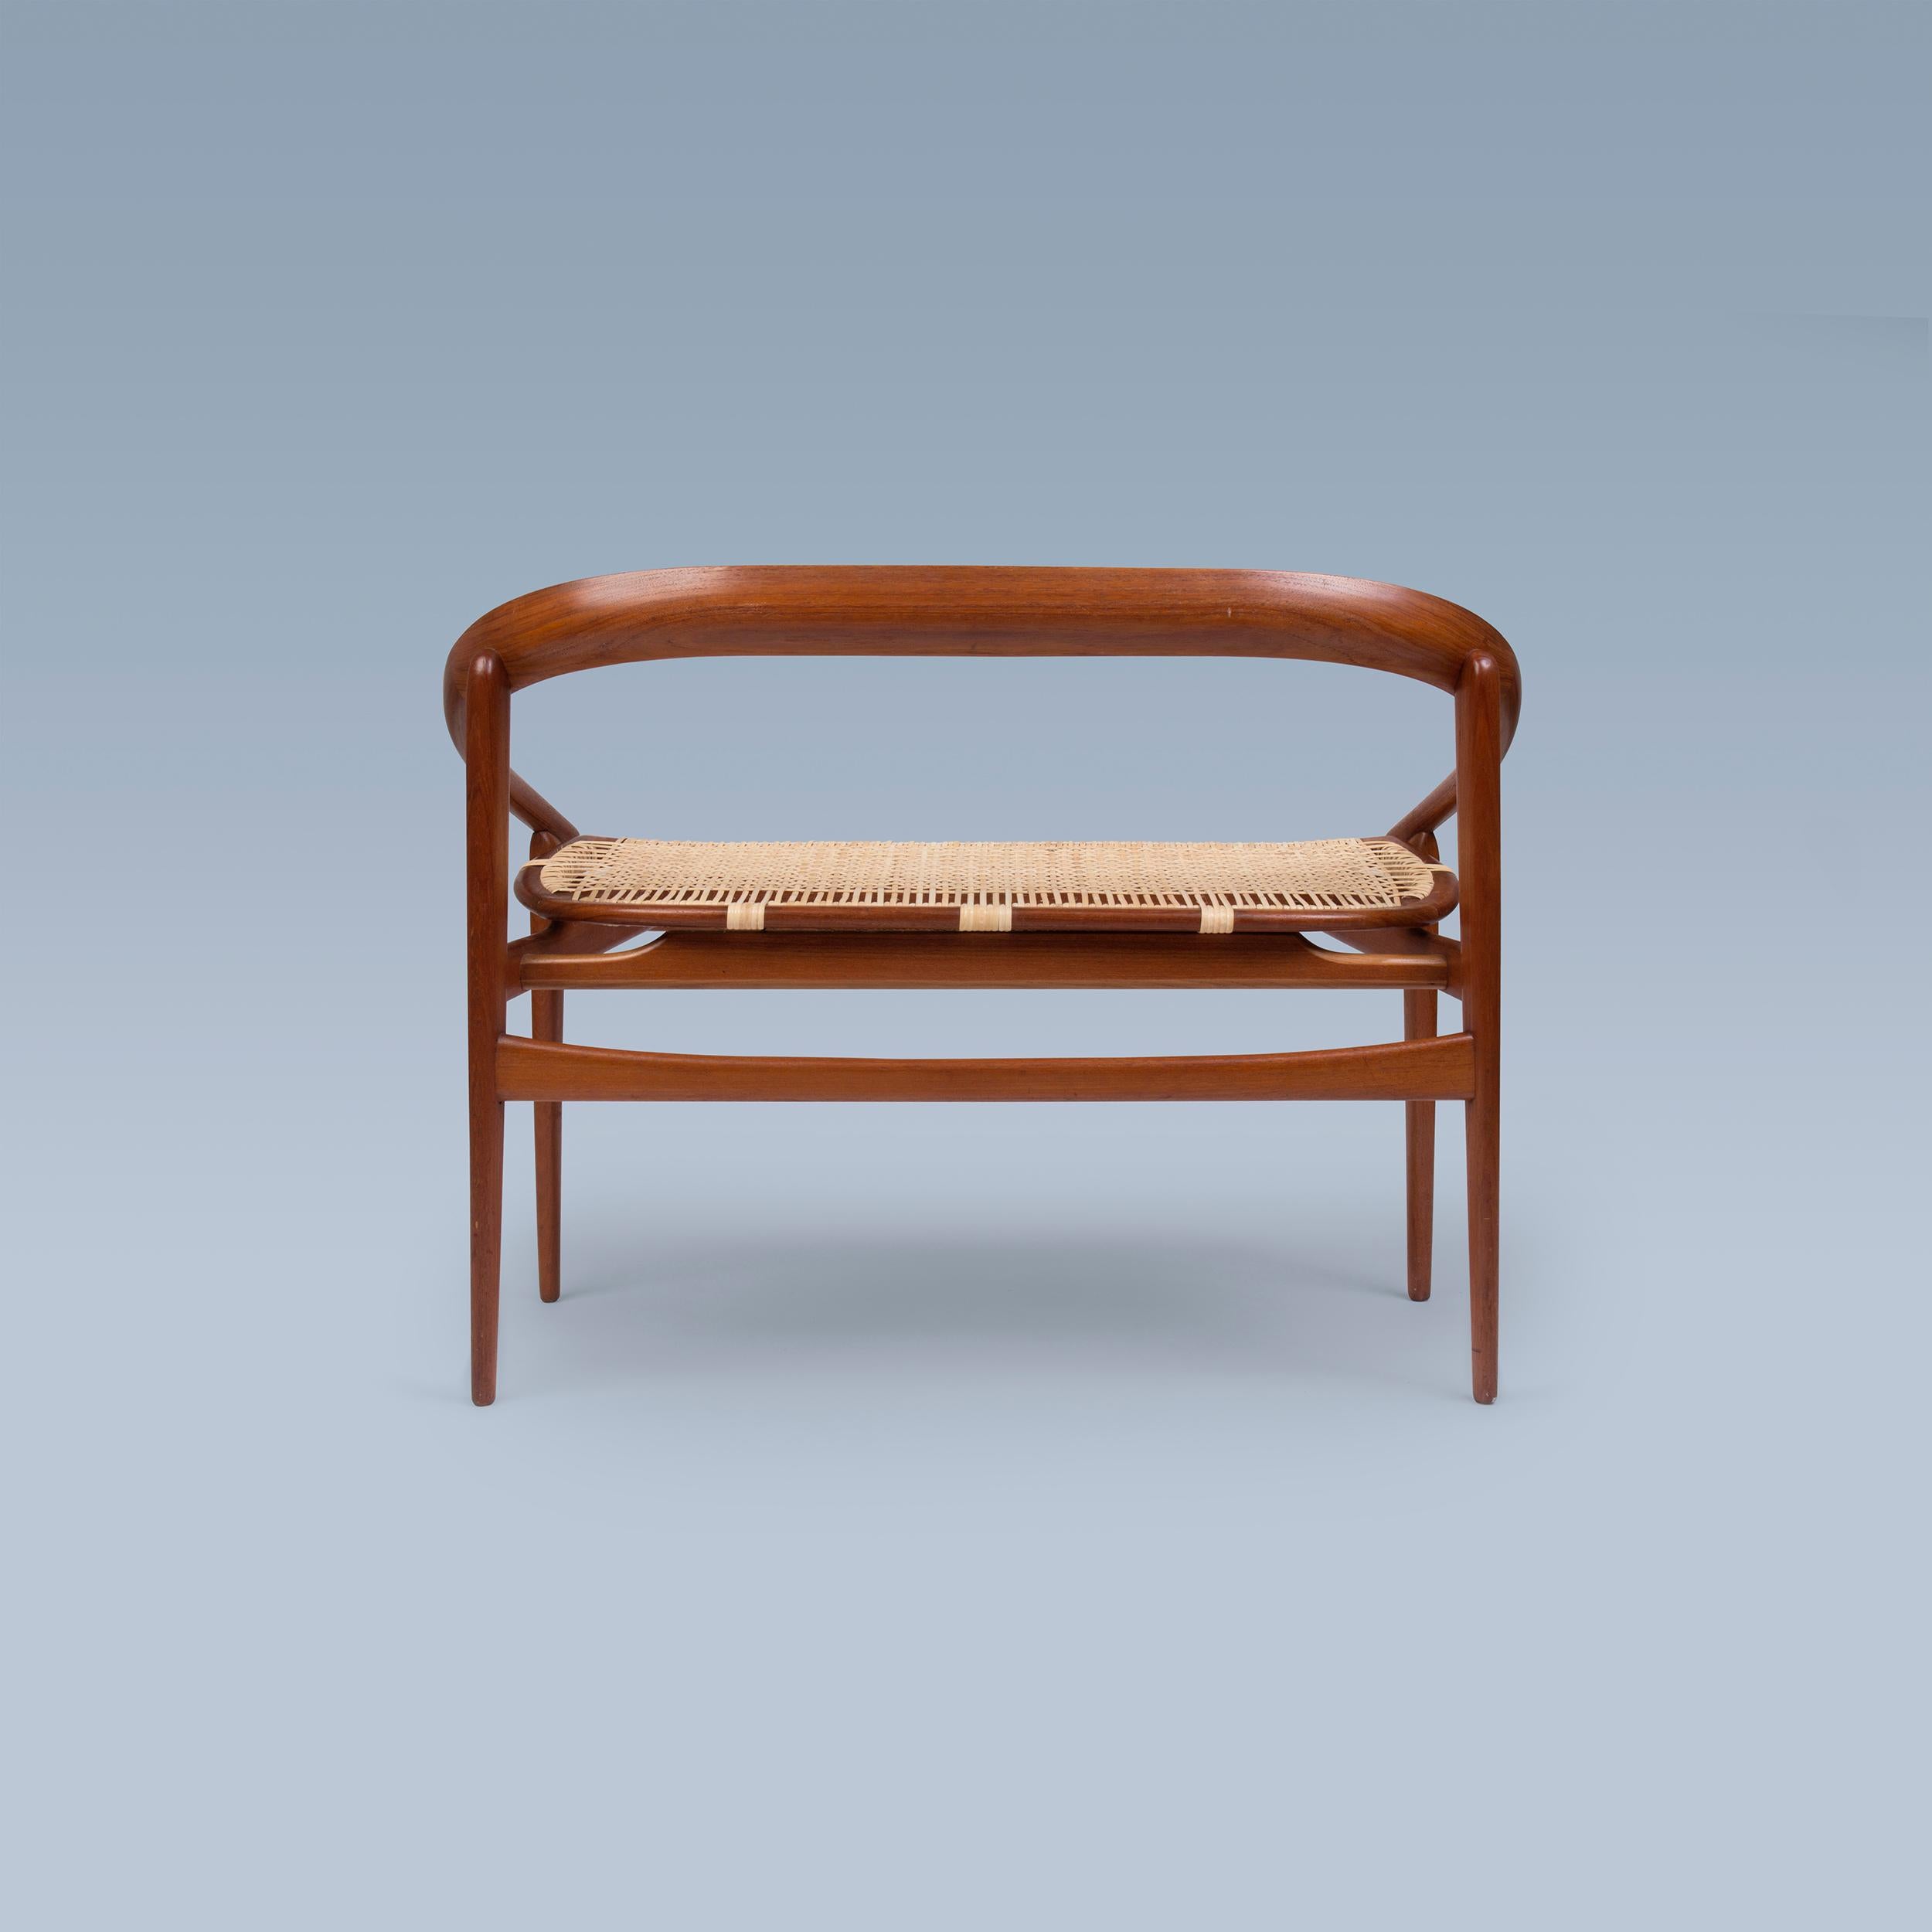 Mid-20th Century Petite Danish modern sofa with horseshoe curved teak and woven light cane seat For Sale